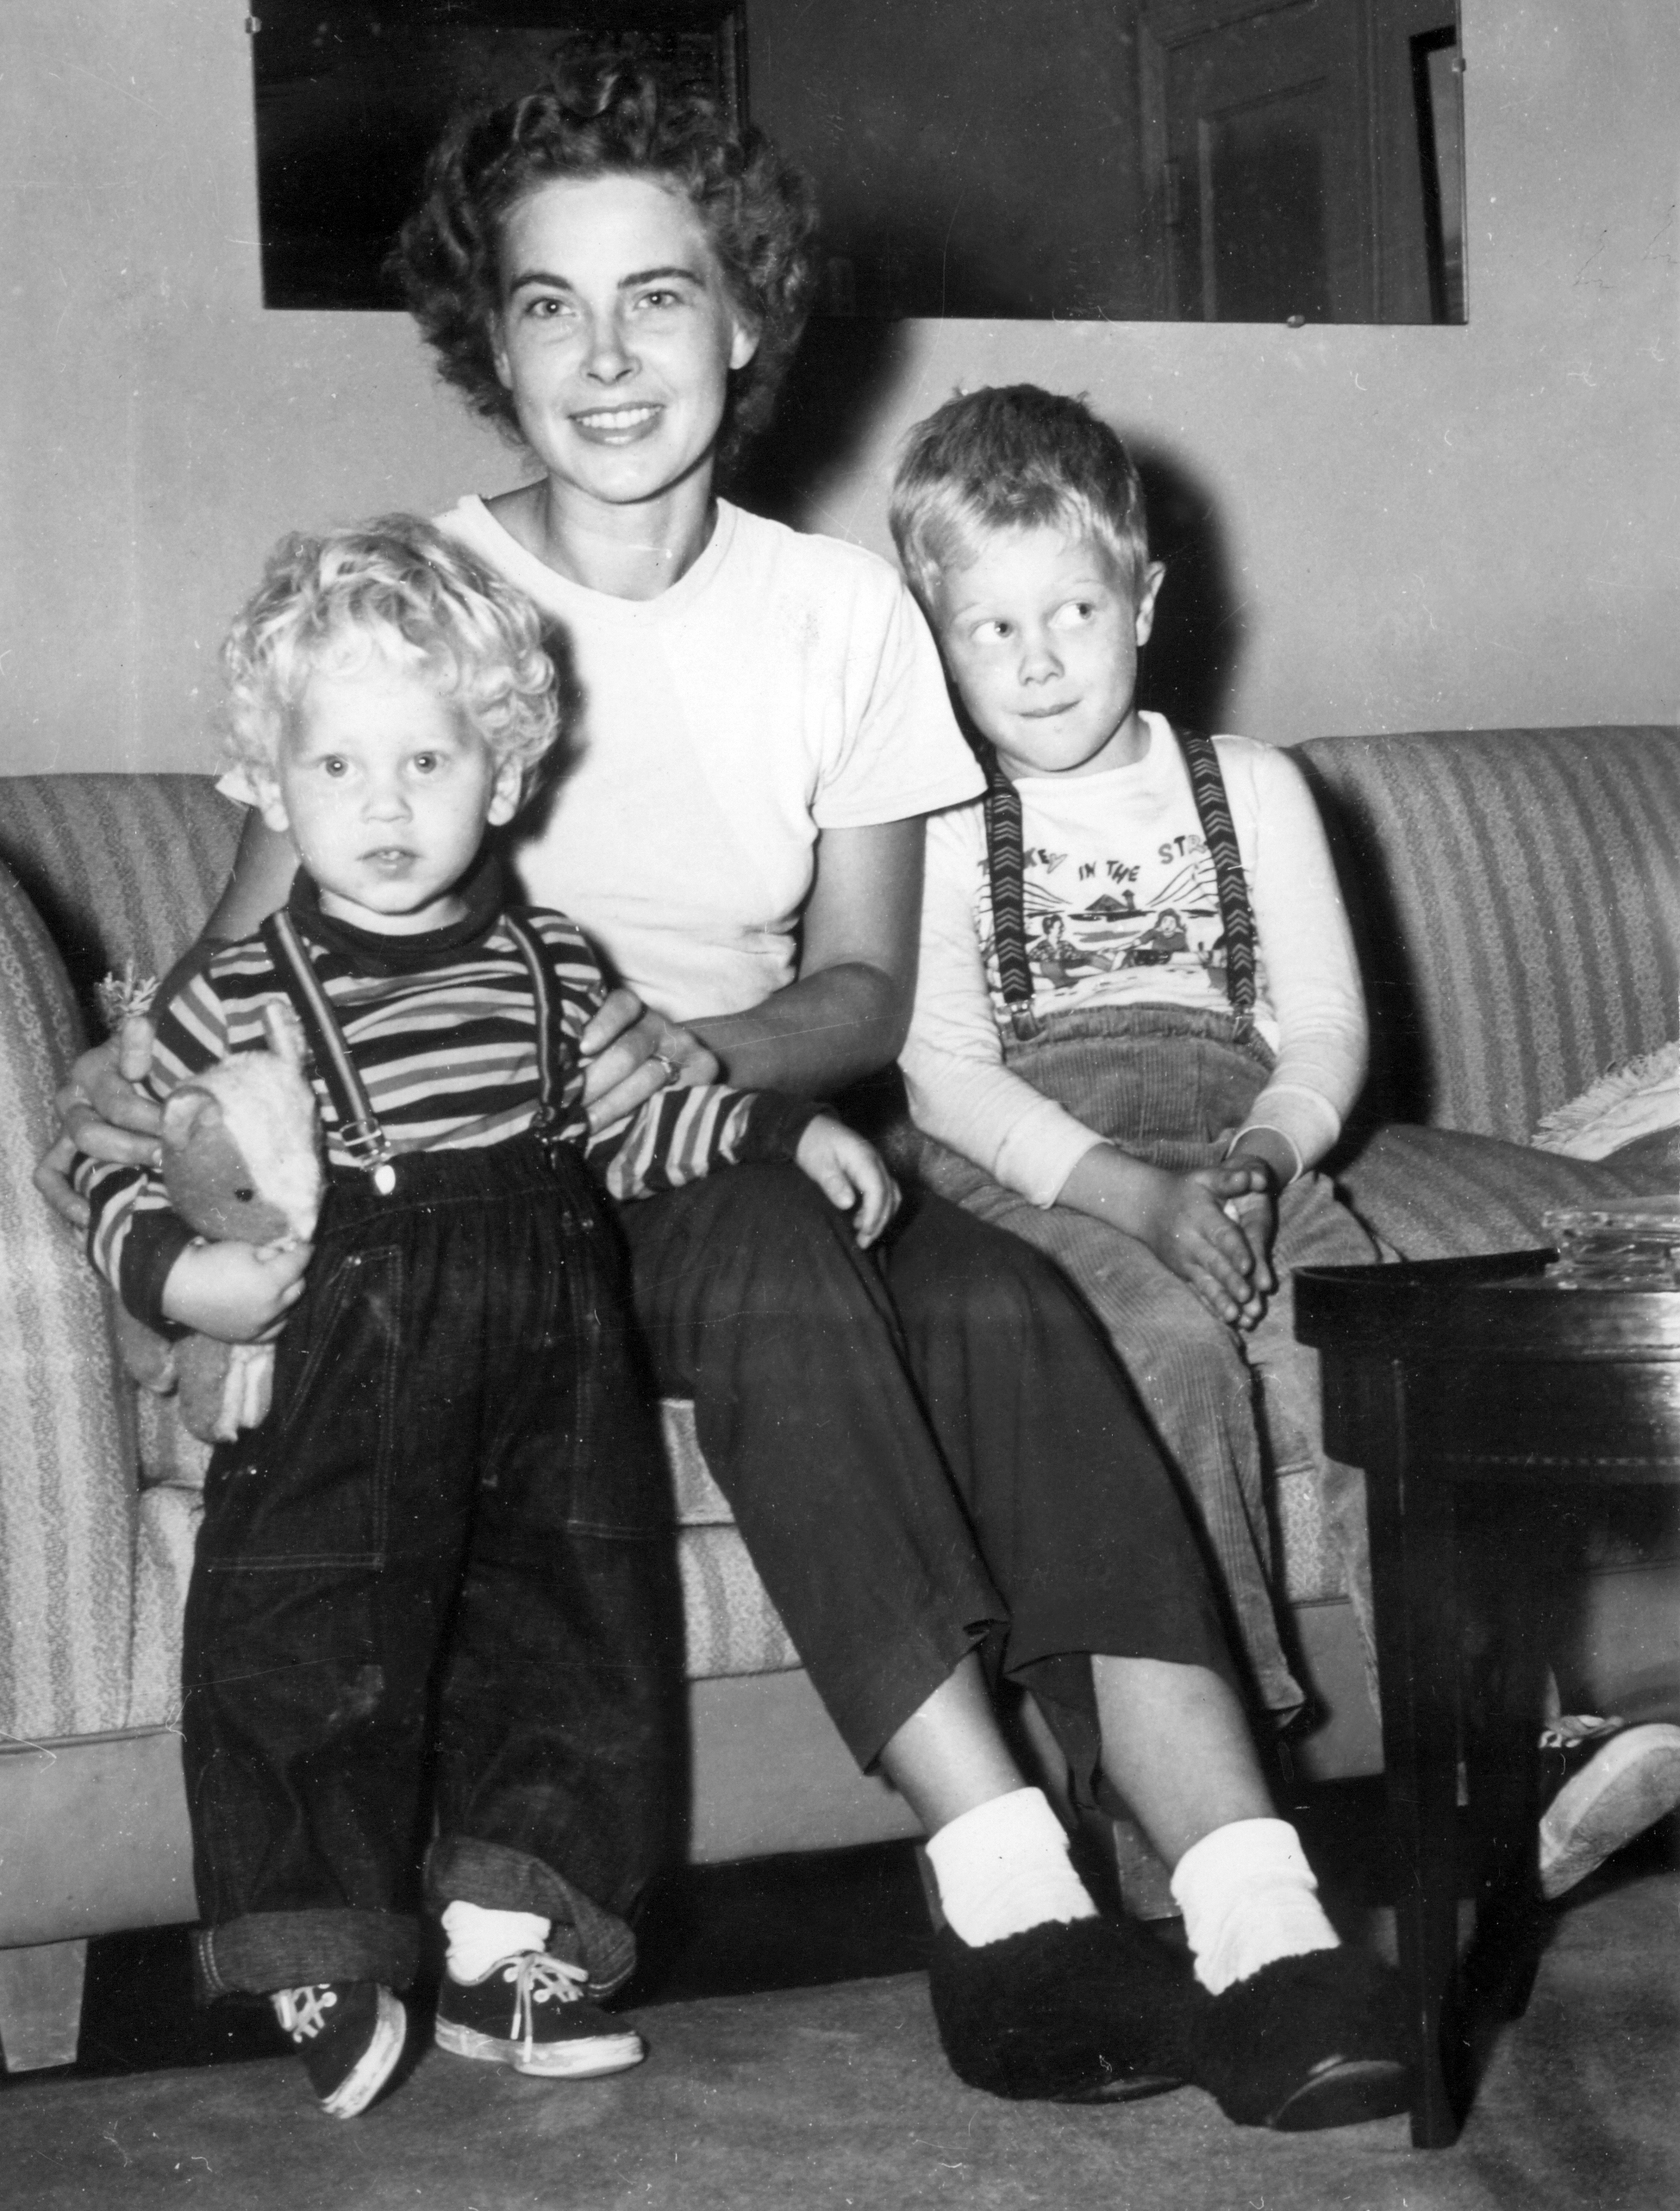 Dennis, Mom, and Me Chesterbrook 1951